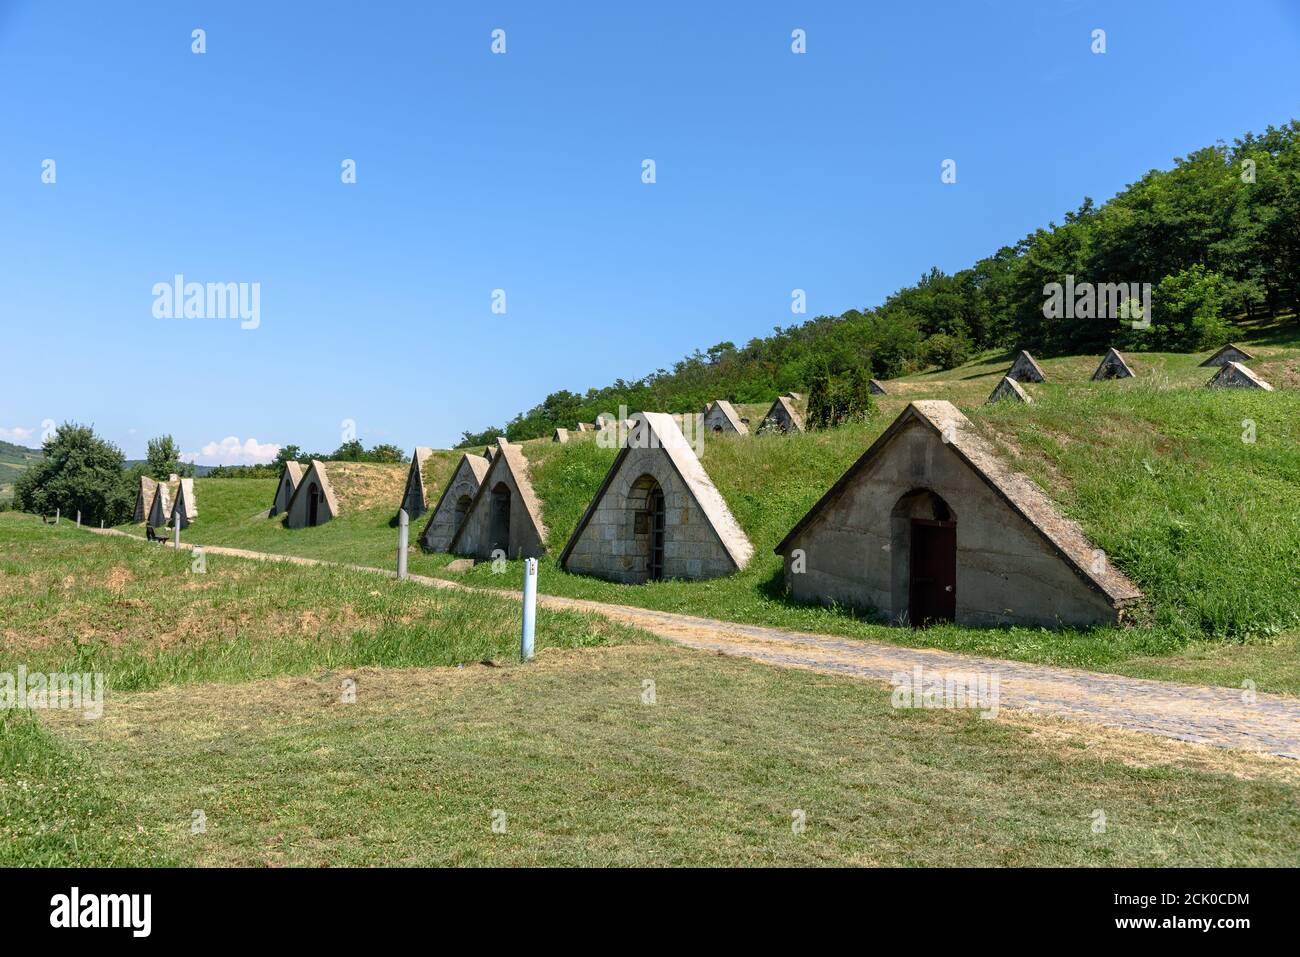 The Gombos-hegyi wine cellars in northern Hungary Stock Photo